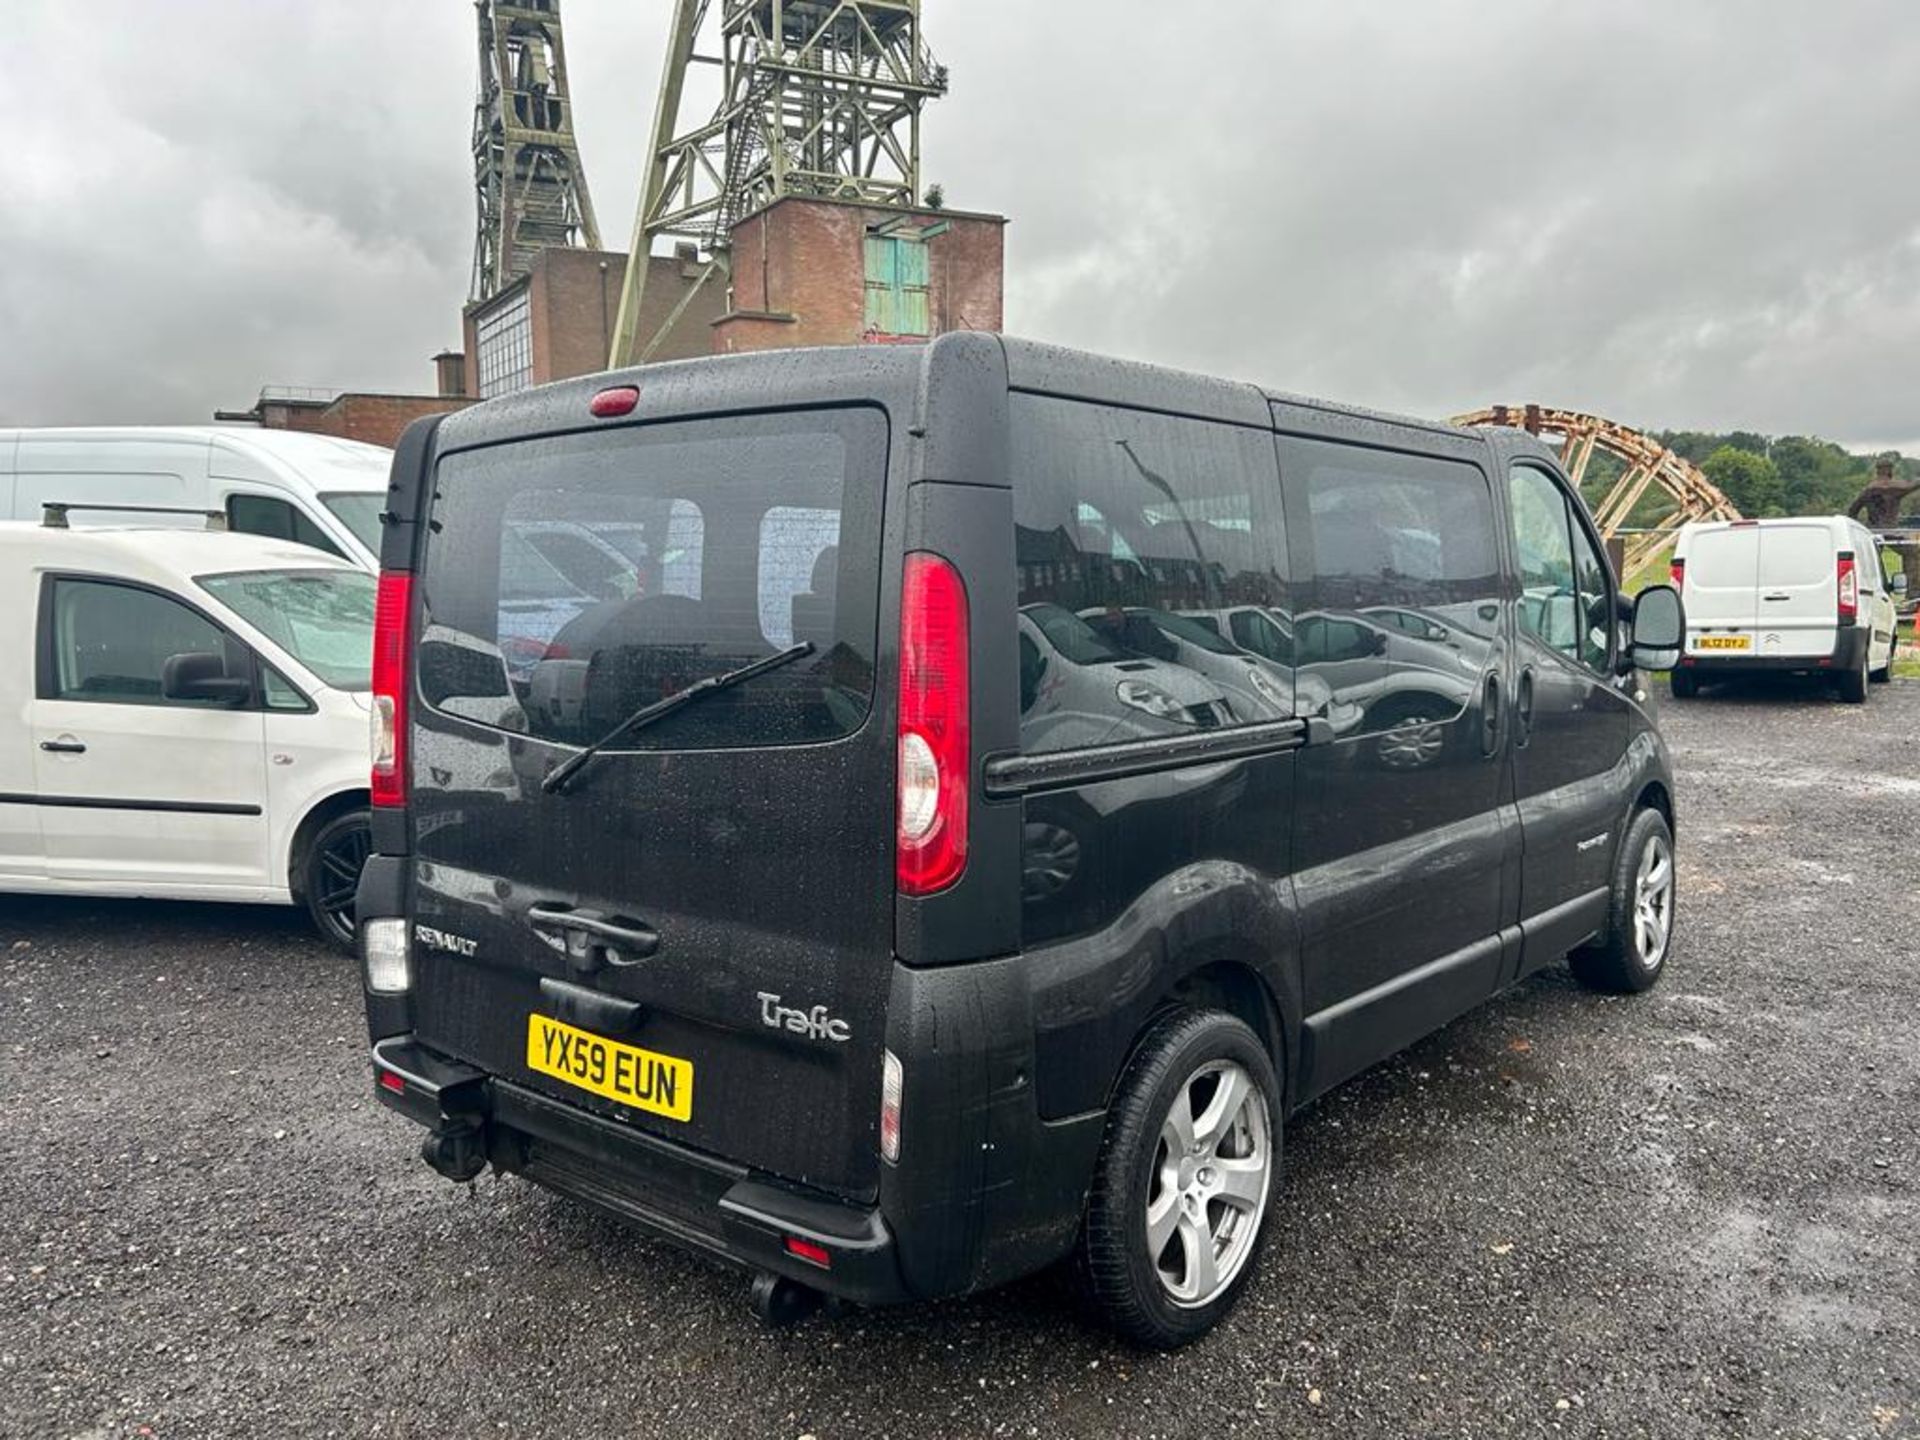 2010 RENAULT TRAFIC SL27 DCI 115 BLACK VAN DERIVED CAR WITH MOBILITY WHEELCHAIR ACCESS *NO VAT* - Image 6 of 18